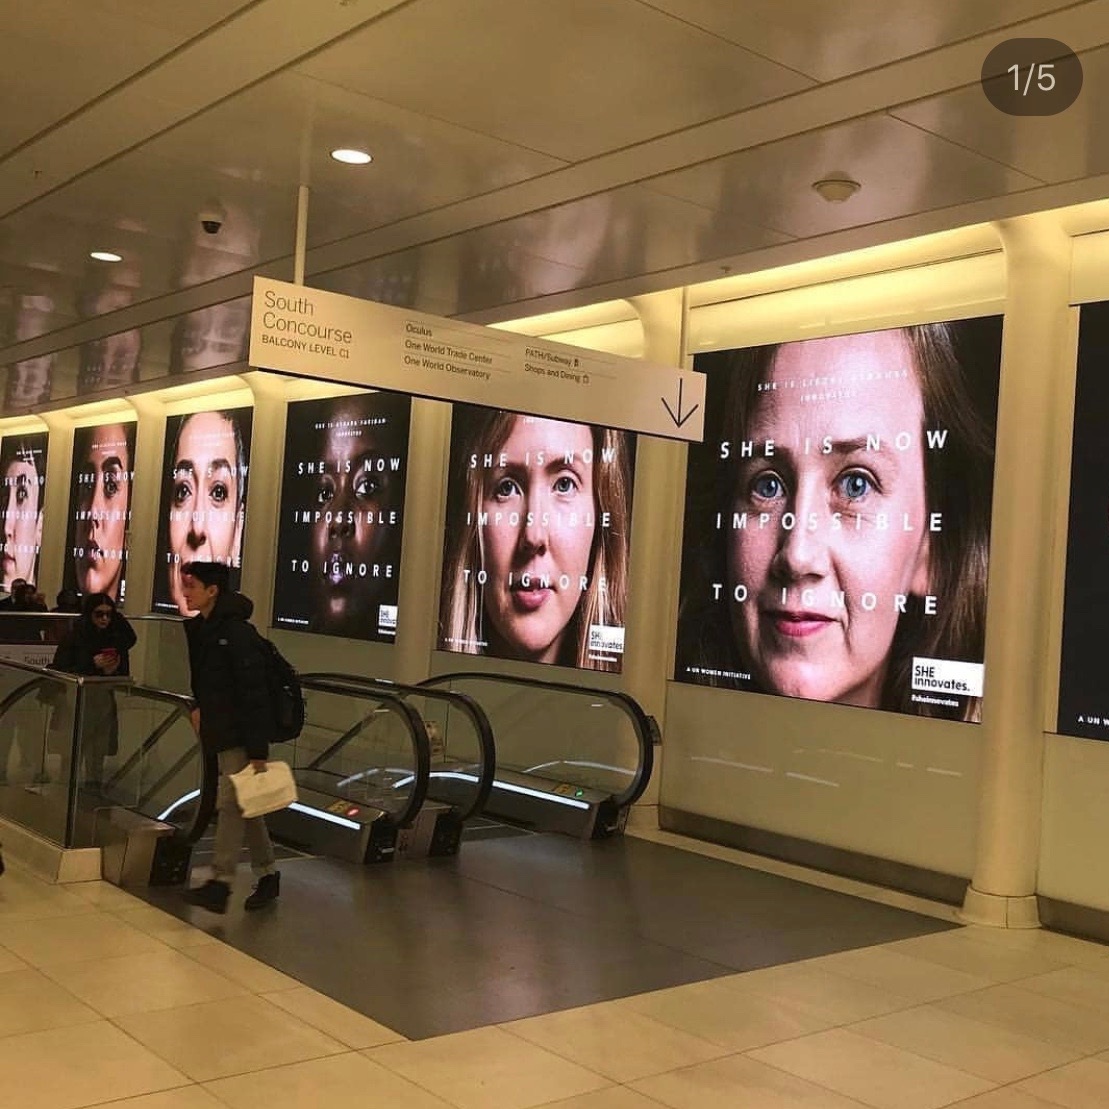 NYC Impossible to Ignore Campaign at Subway station.JPG